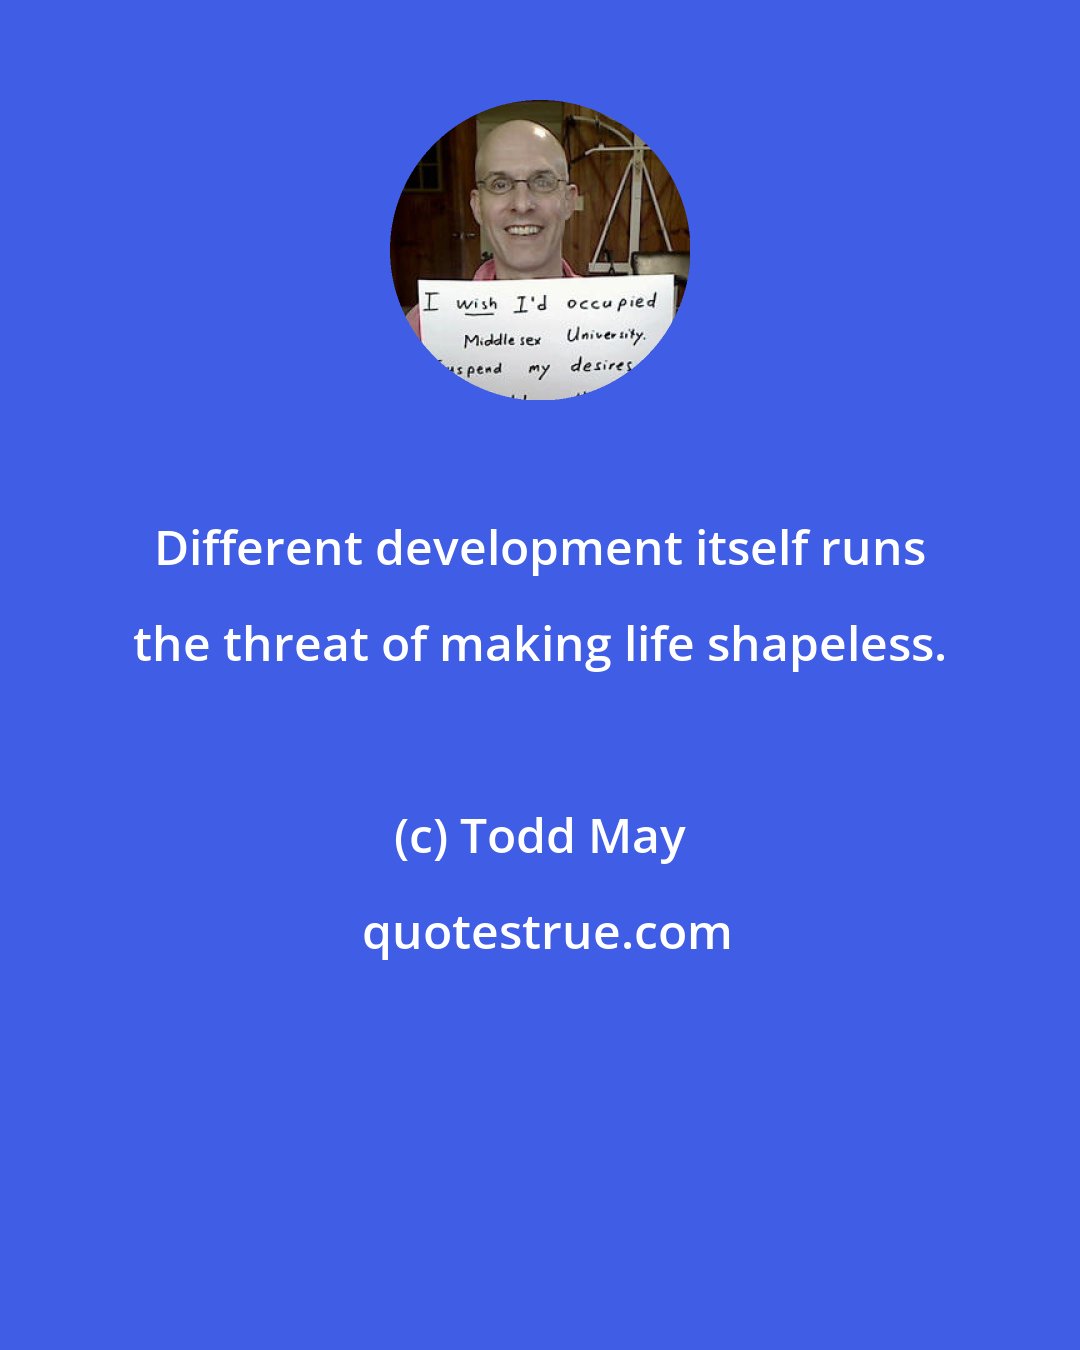 Todd May: Different development itself runs the threat of making life shapeless.